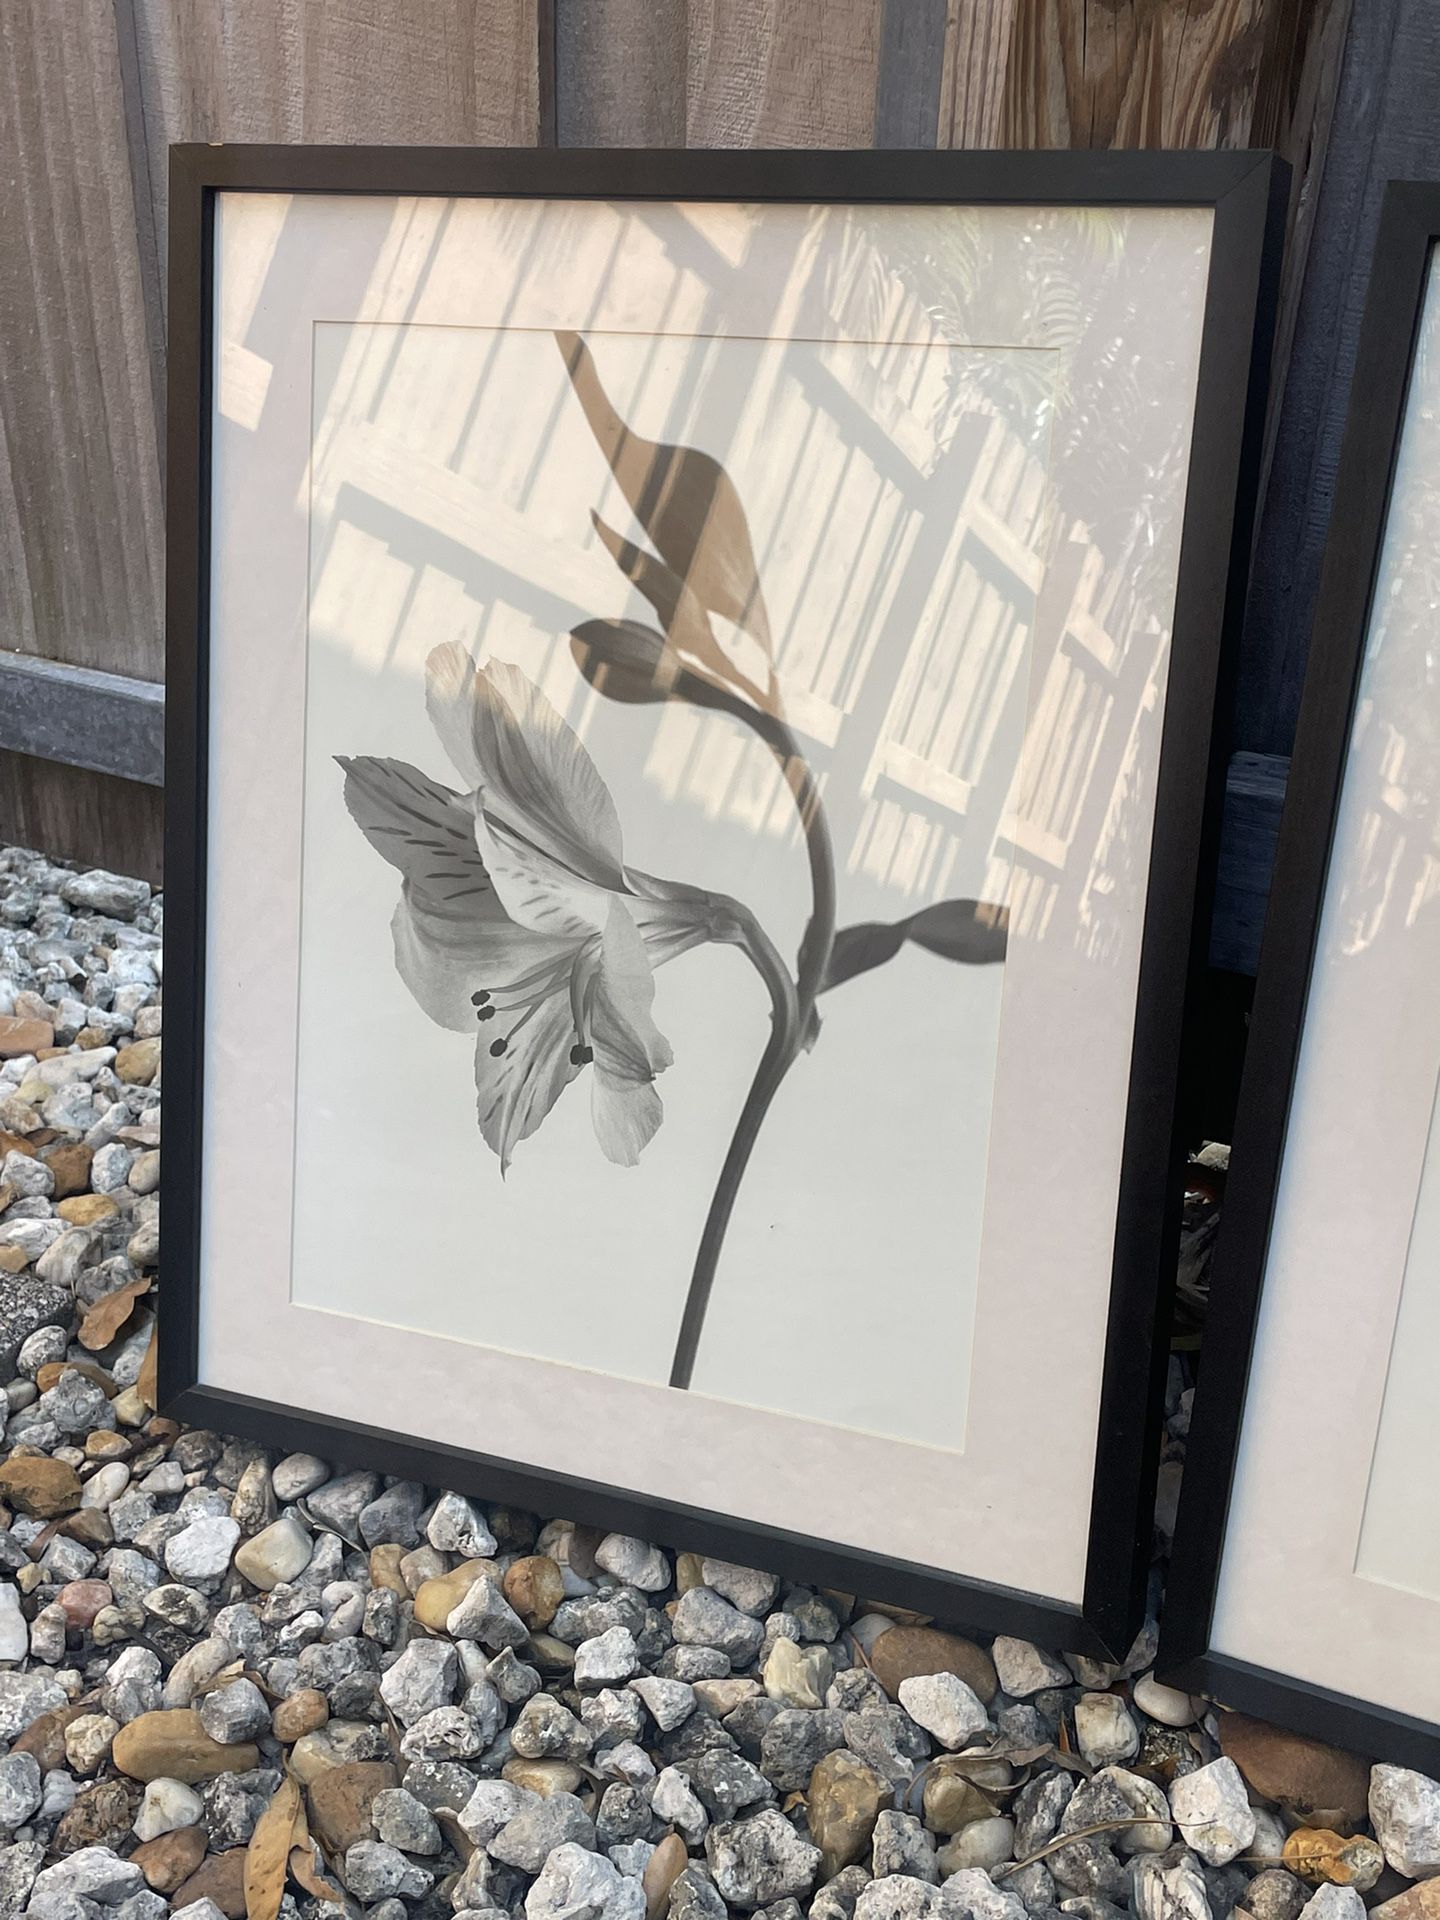 Framed Picture Behind The Glass, Flower, Black & White, 21” H x 17” W